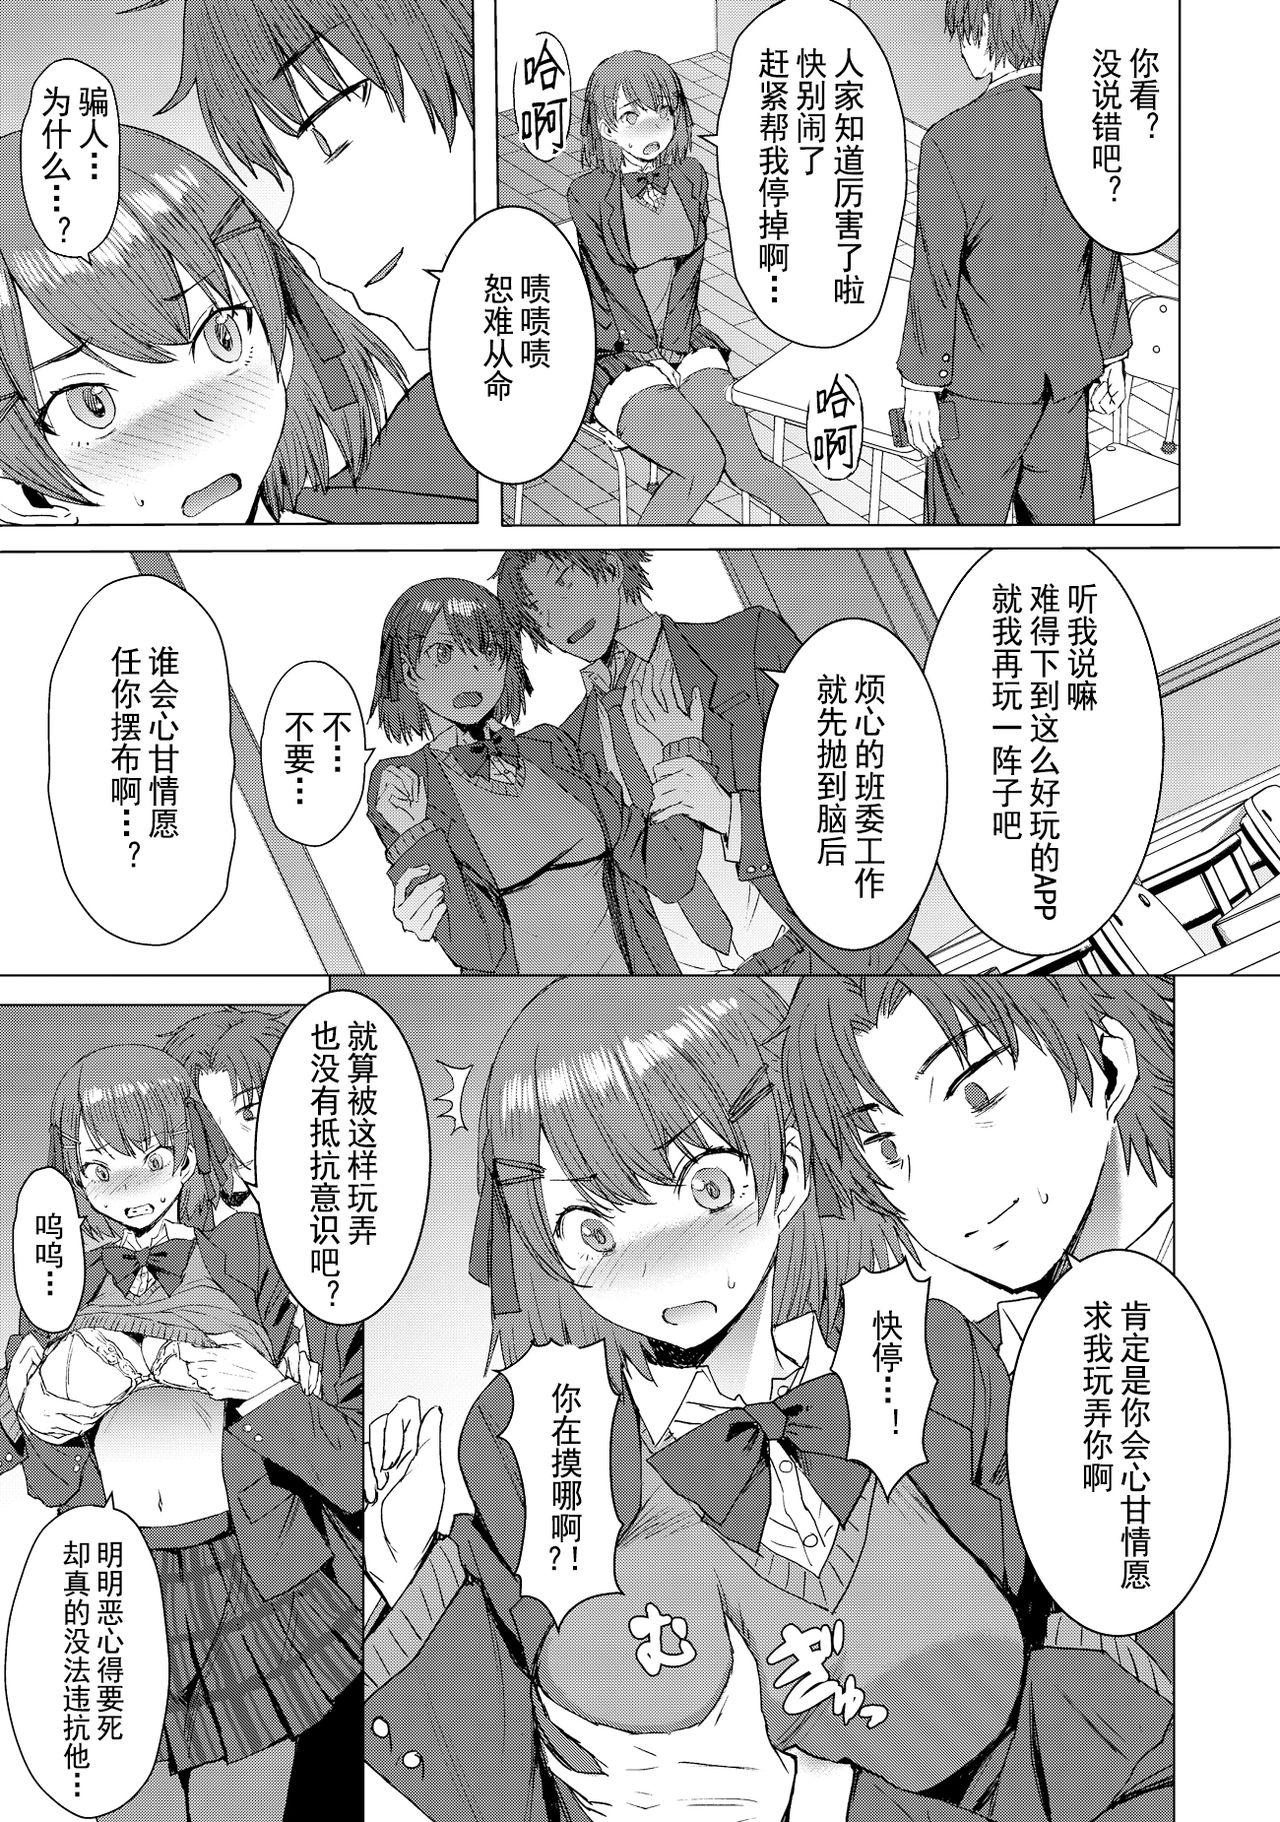 Sexy Girl Inmon Koubi Appli - The application of lewd pattern mating - Original Trimmed - Page 11